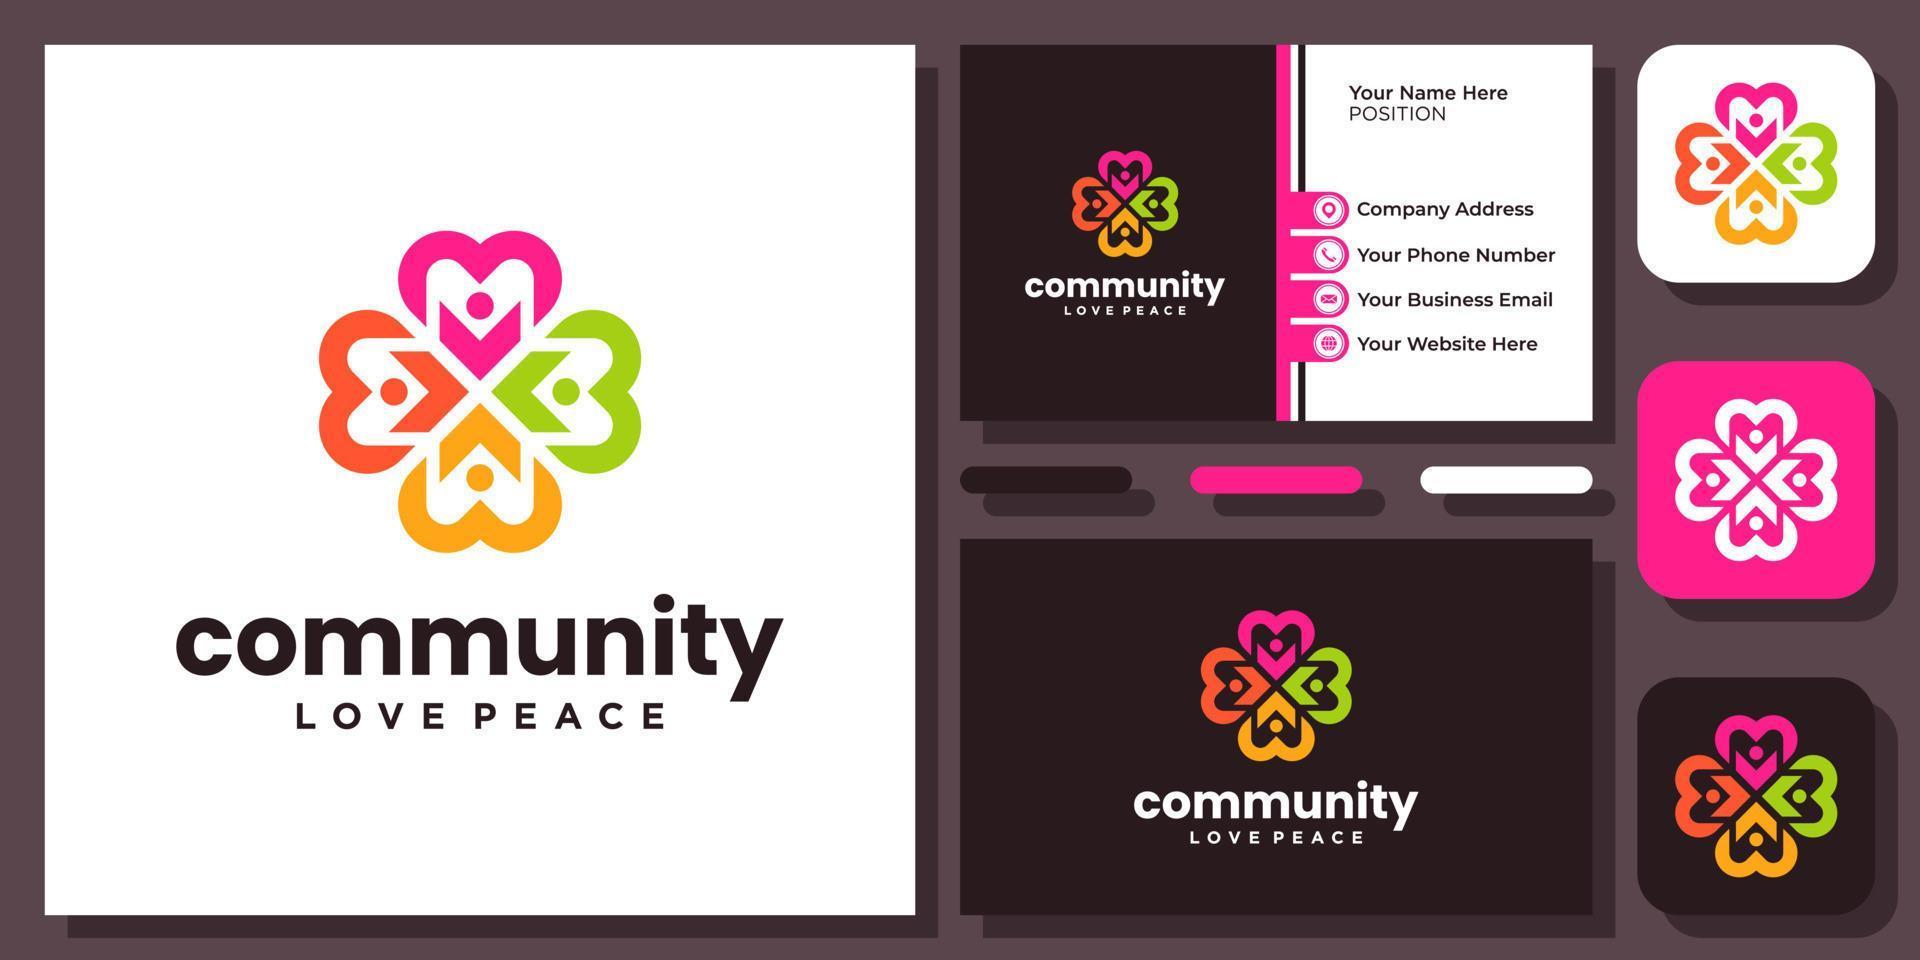 Love Community Heart Union Family People Health Care Together Vector Logo Design with Business Card